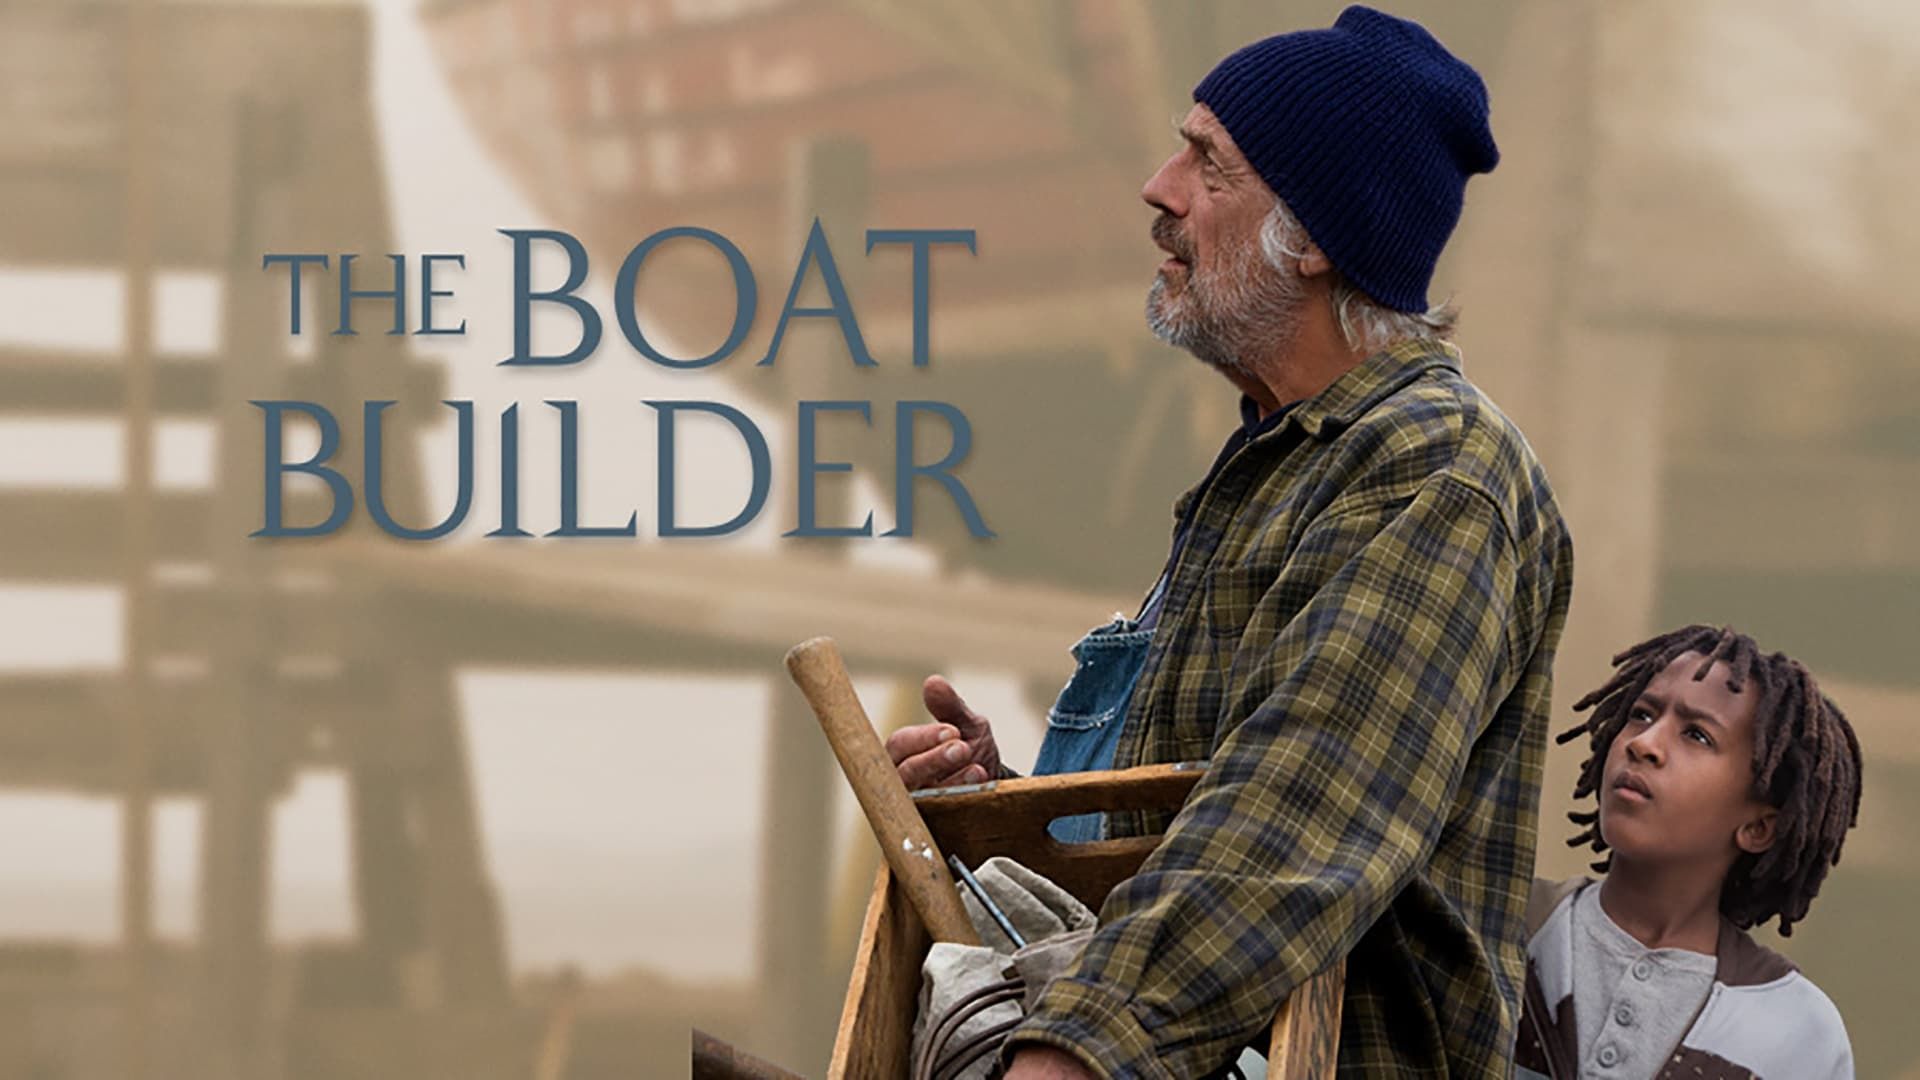 The Boat Builder background